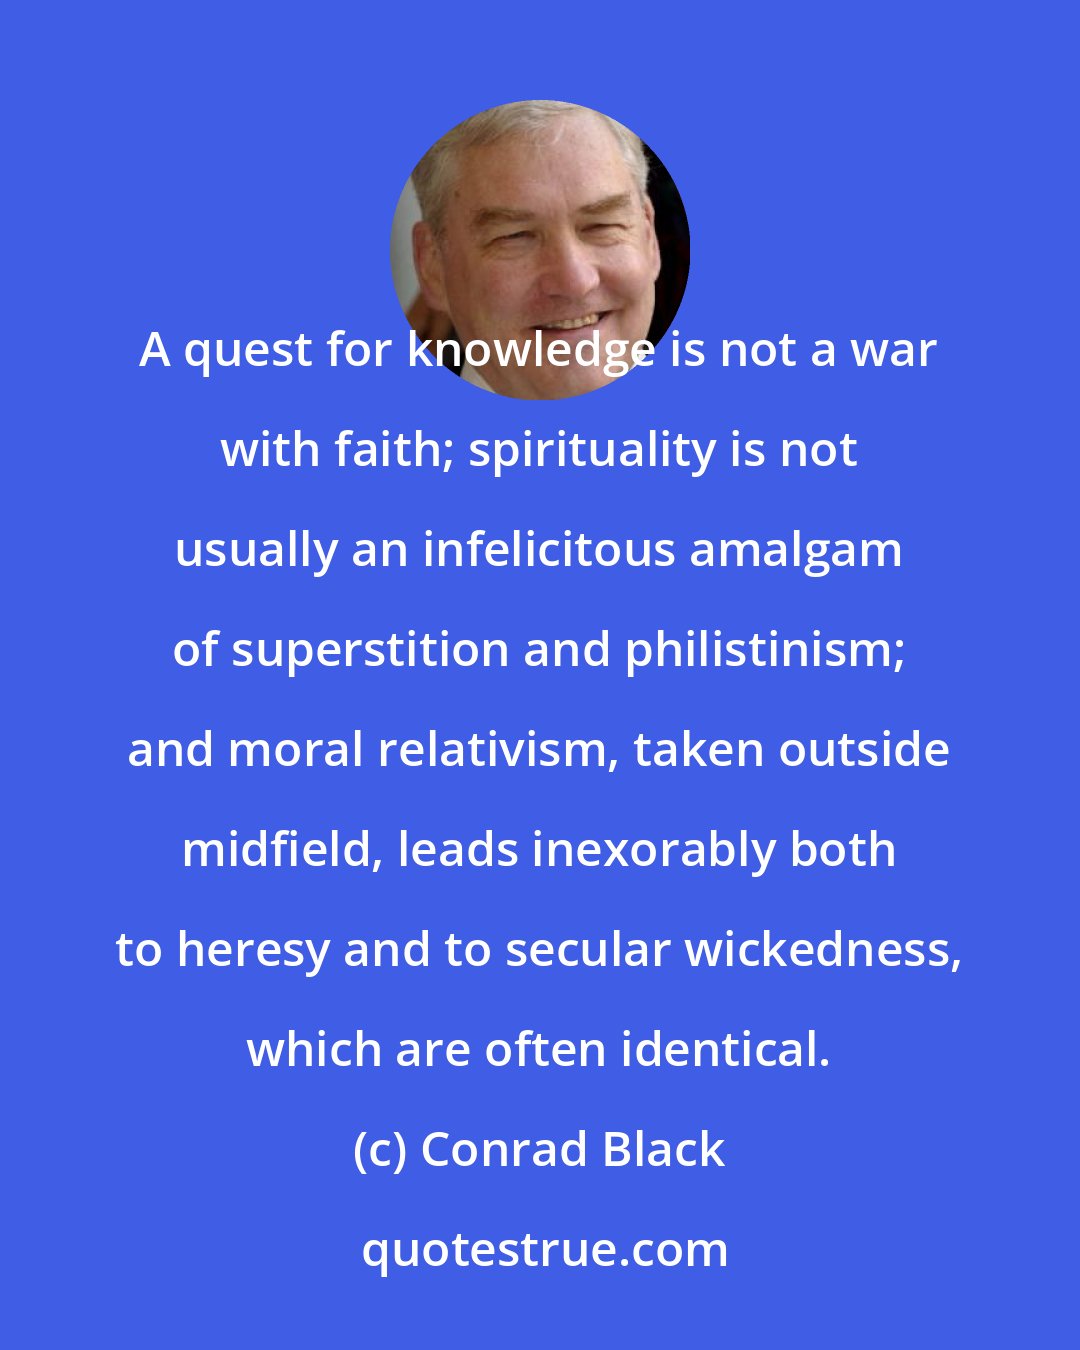 Conrad Black: A quest for knowledge is not a war with faith; spirituality is not usually an infelicitous amalgam of superstition and philistinism; and moral relativism, taken outside midfield, leads inexorably both to heresy and to secular wickedness, which are often identical.